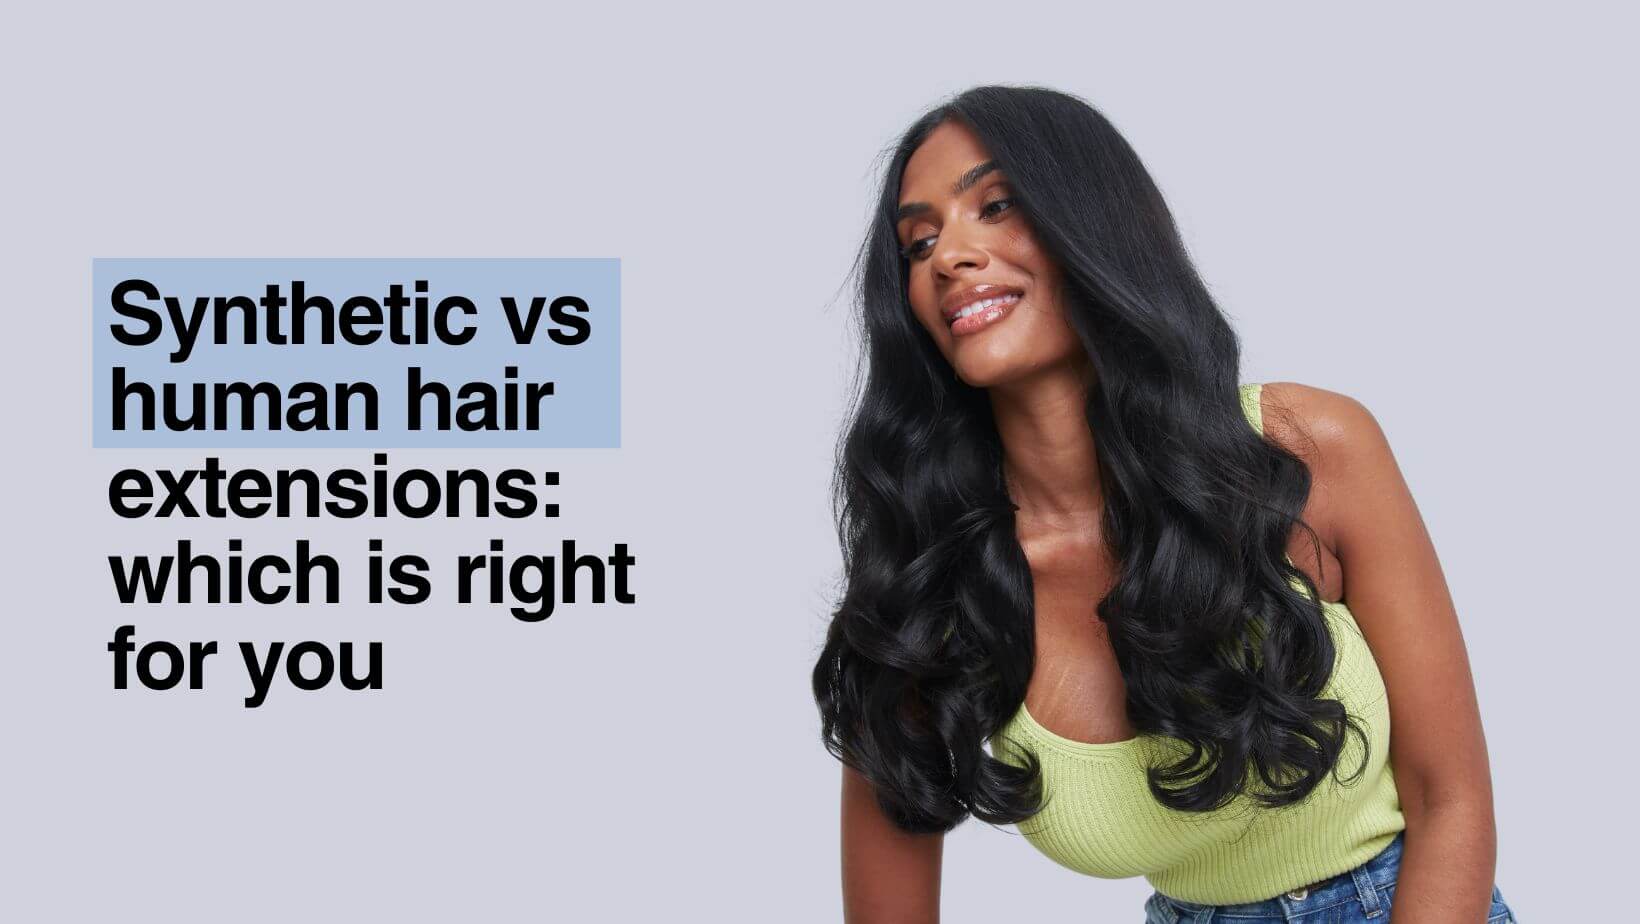 Synthetic v human hair extensions: which is right for you